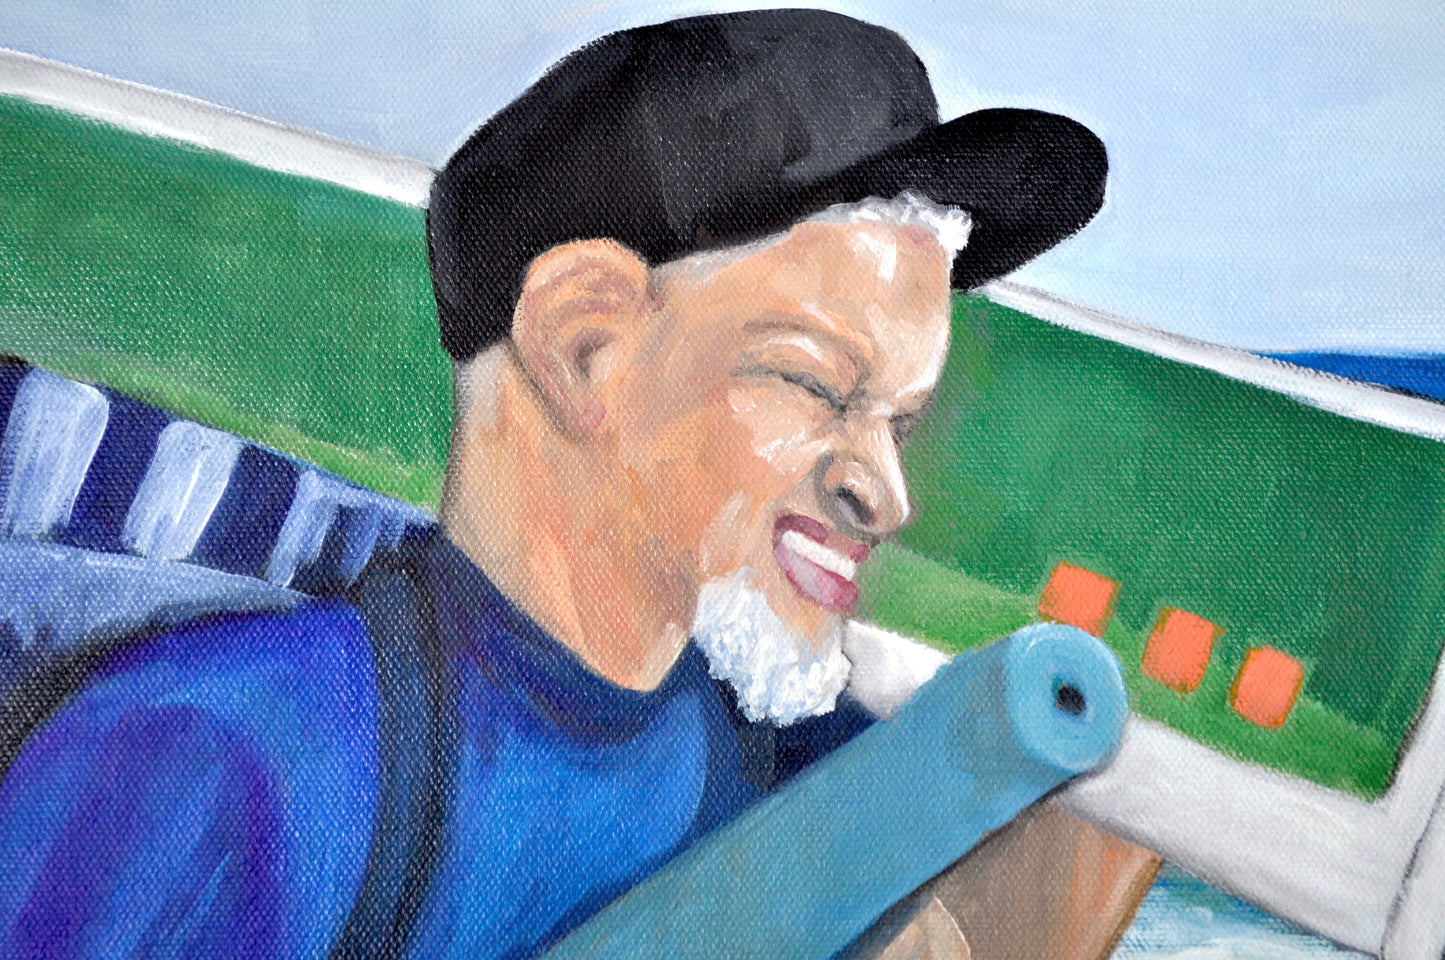 Fatherhood Painting Father at the Beach